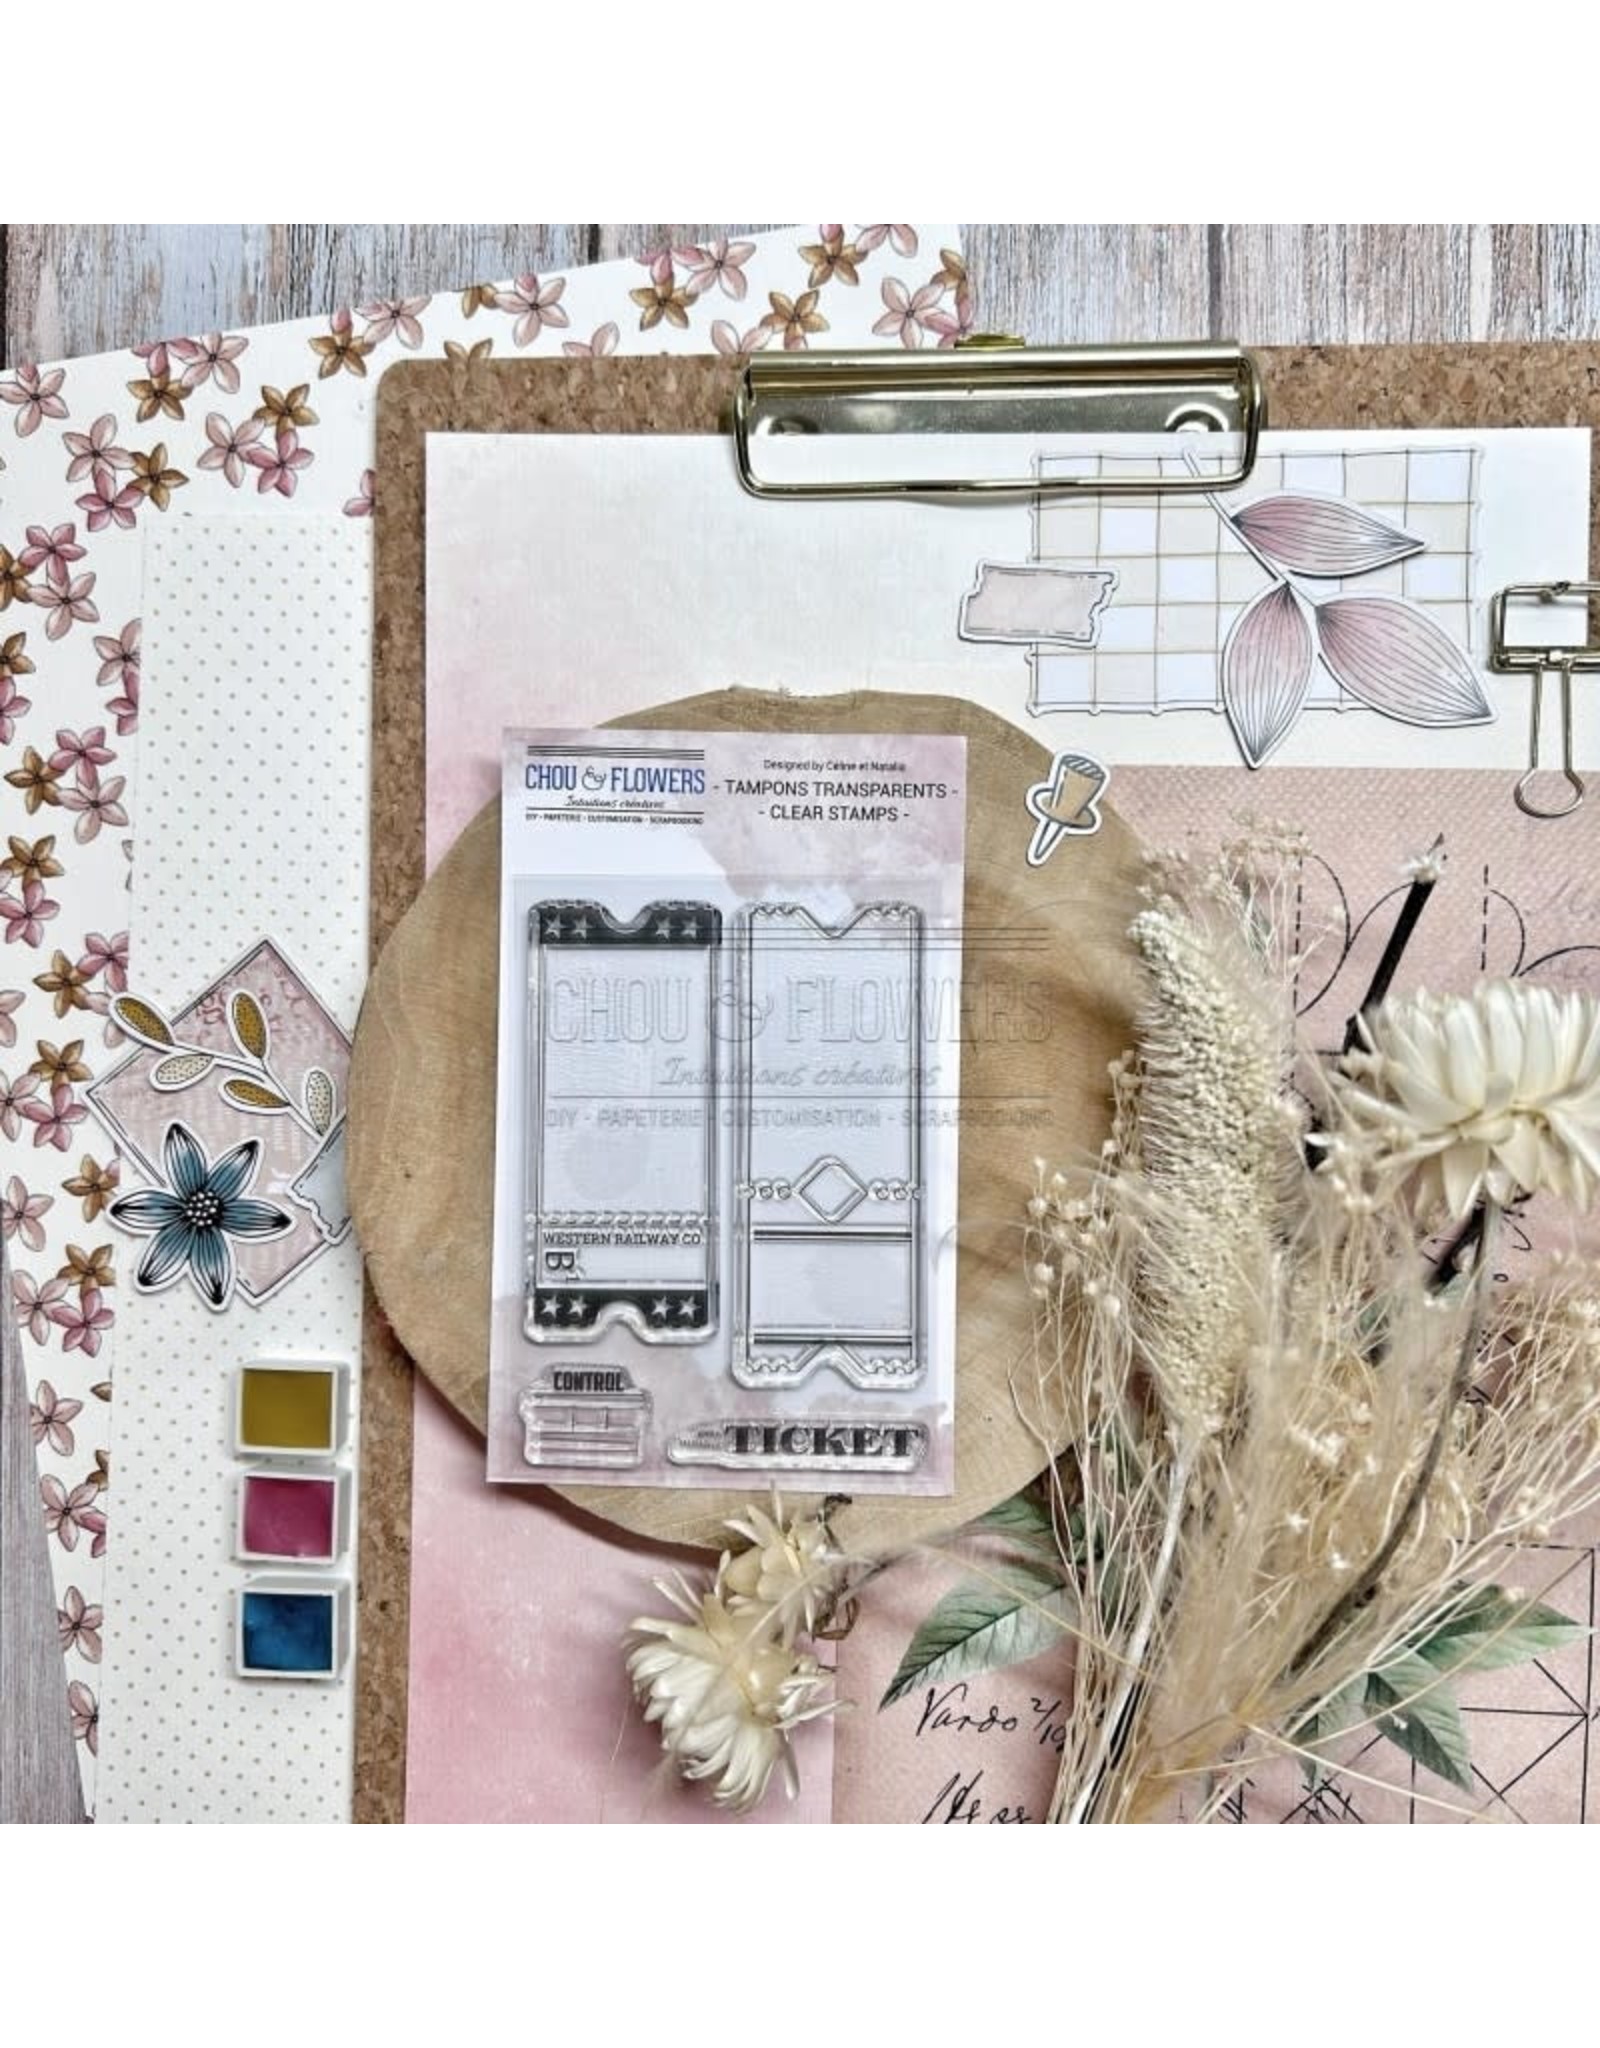 CHOU & FLOWERS CHOU & FLOWERS VICTORIA STREET COLLECTION CONTROL TICKET CLEAR STAMP SET